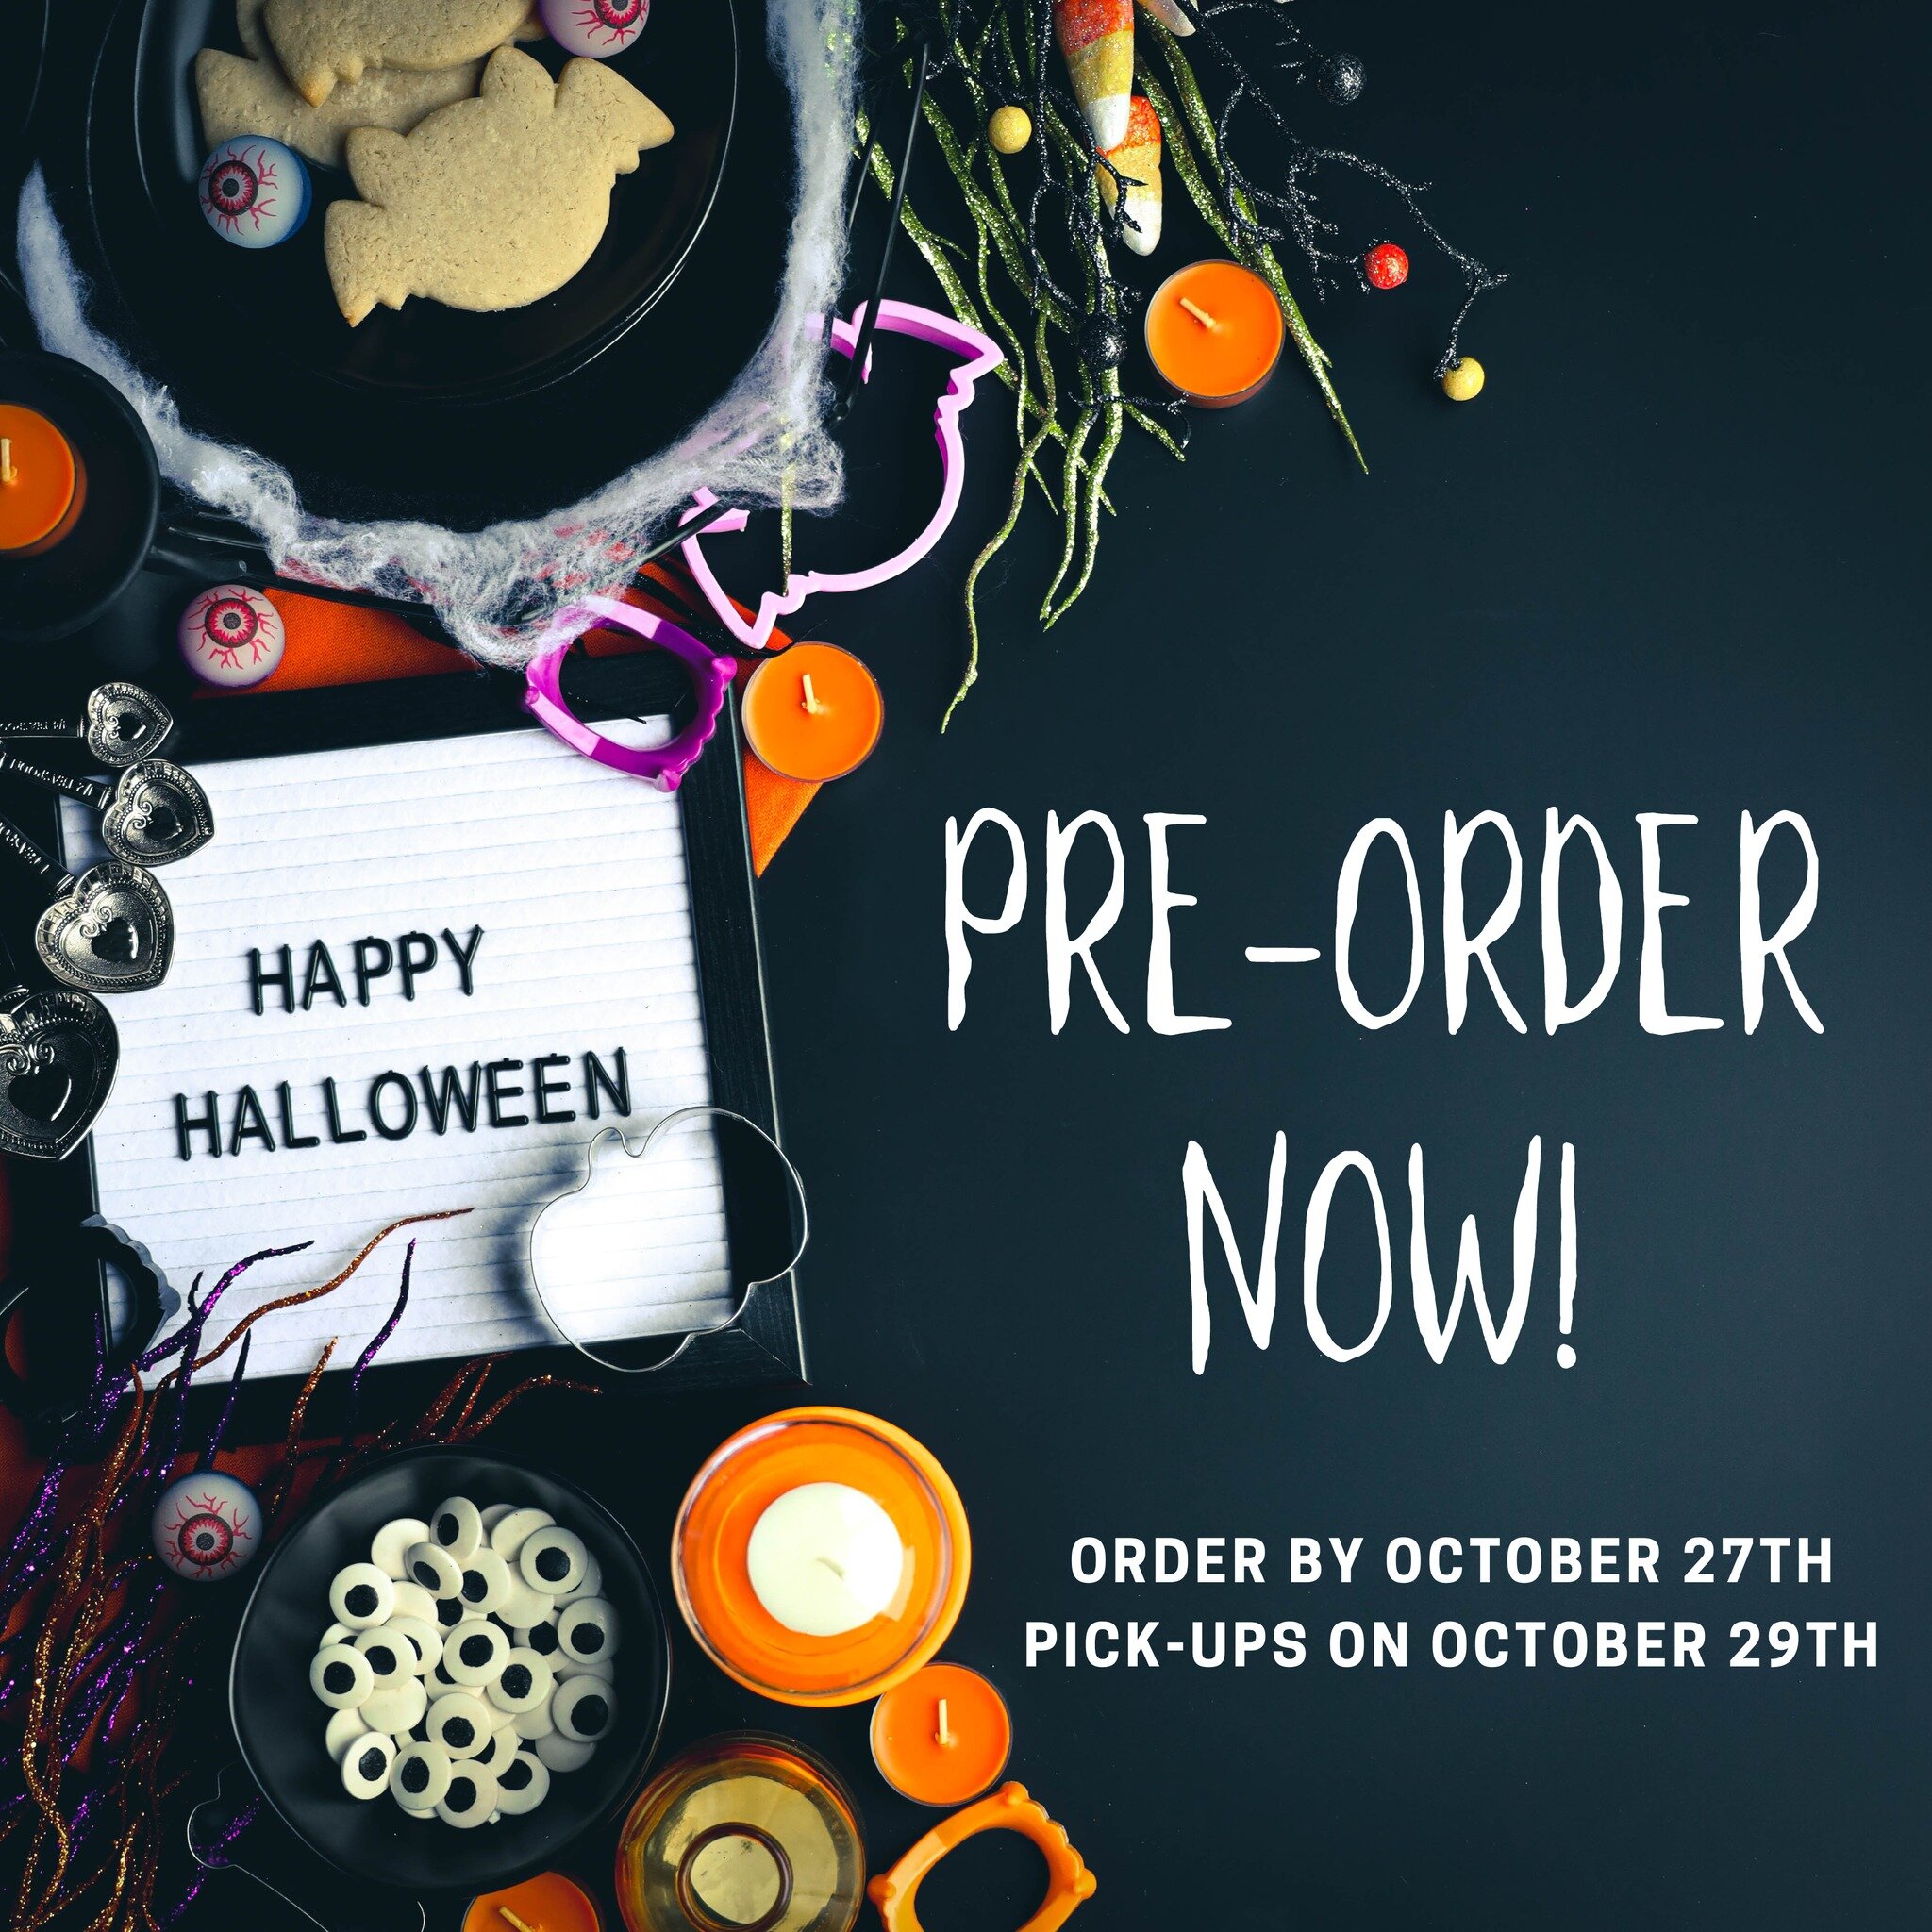 🎃💀 Halloween Sweet Treats! Pre-orders now open! 🍪🍬

Calling all cookie enthusiasts! Get ready to indulge in spooky deliciousness this Halloween with our tantalizing treats. As a decorated sugar cookie baker extraordinaire, I present to you our mo